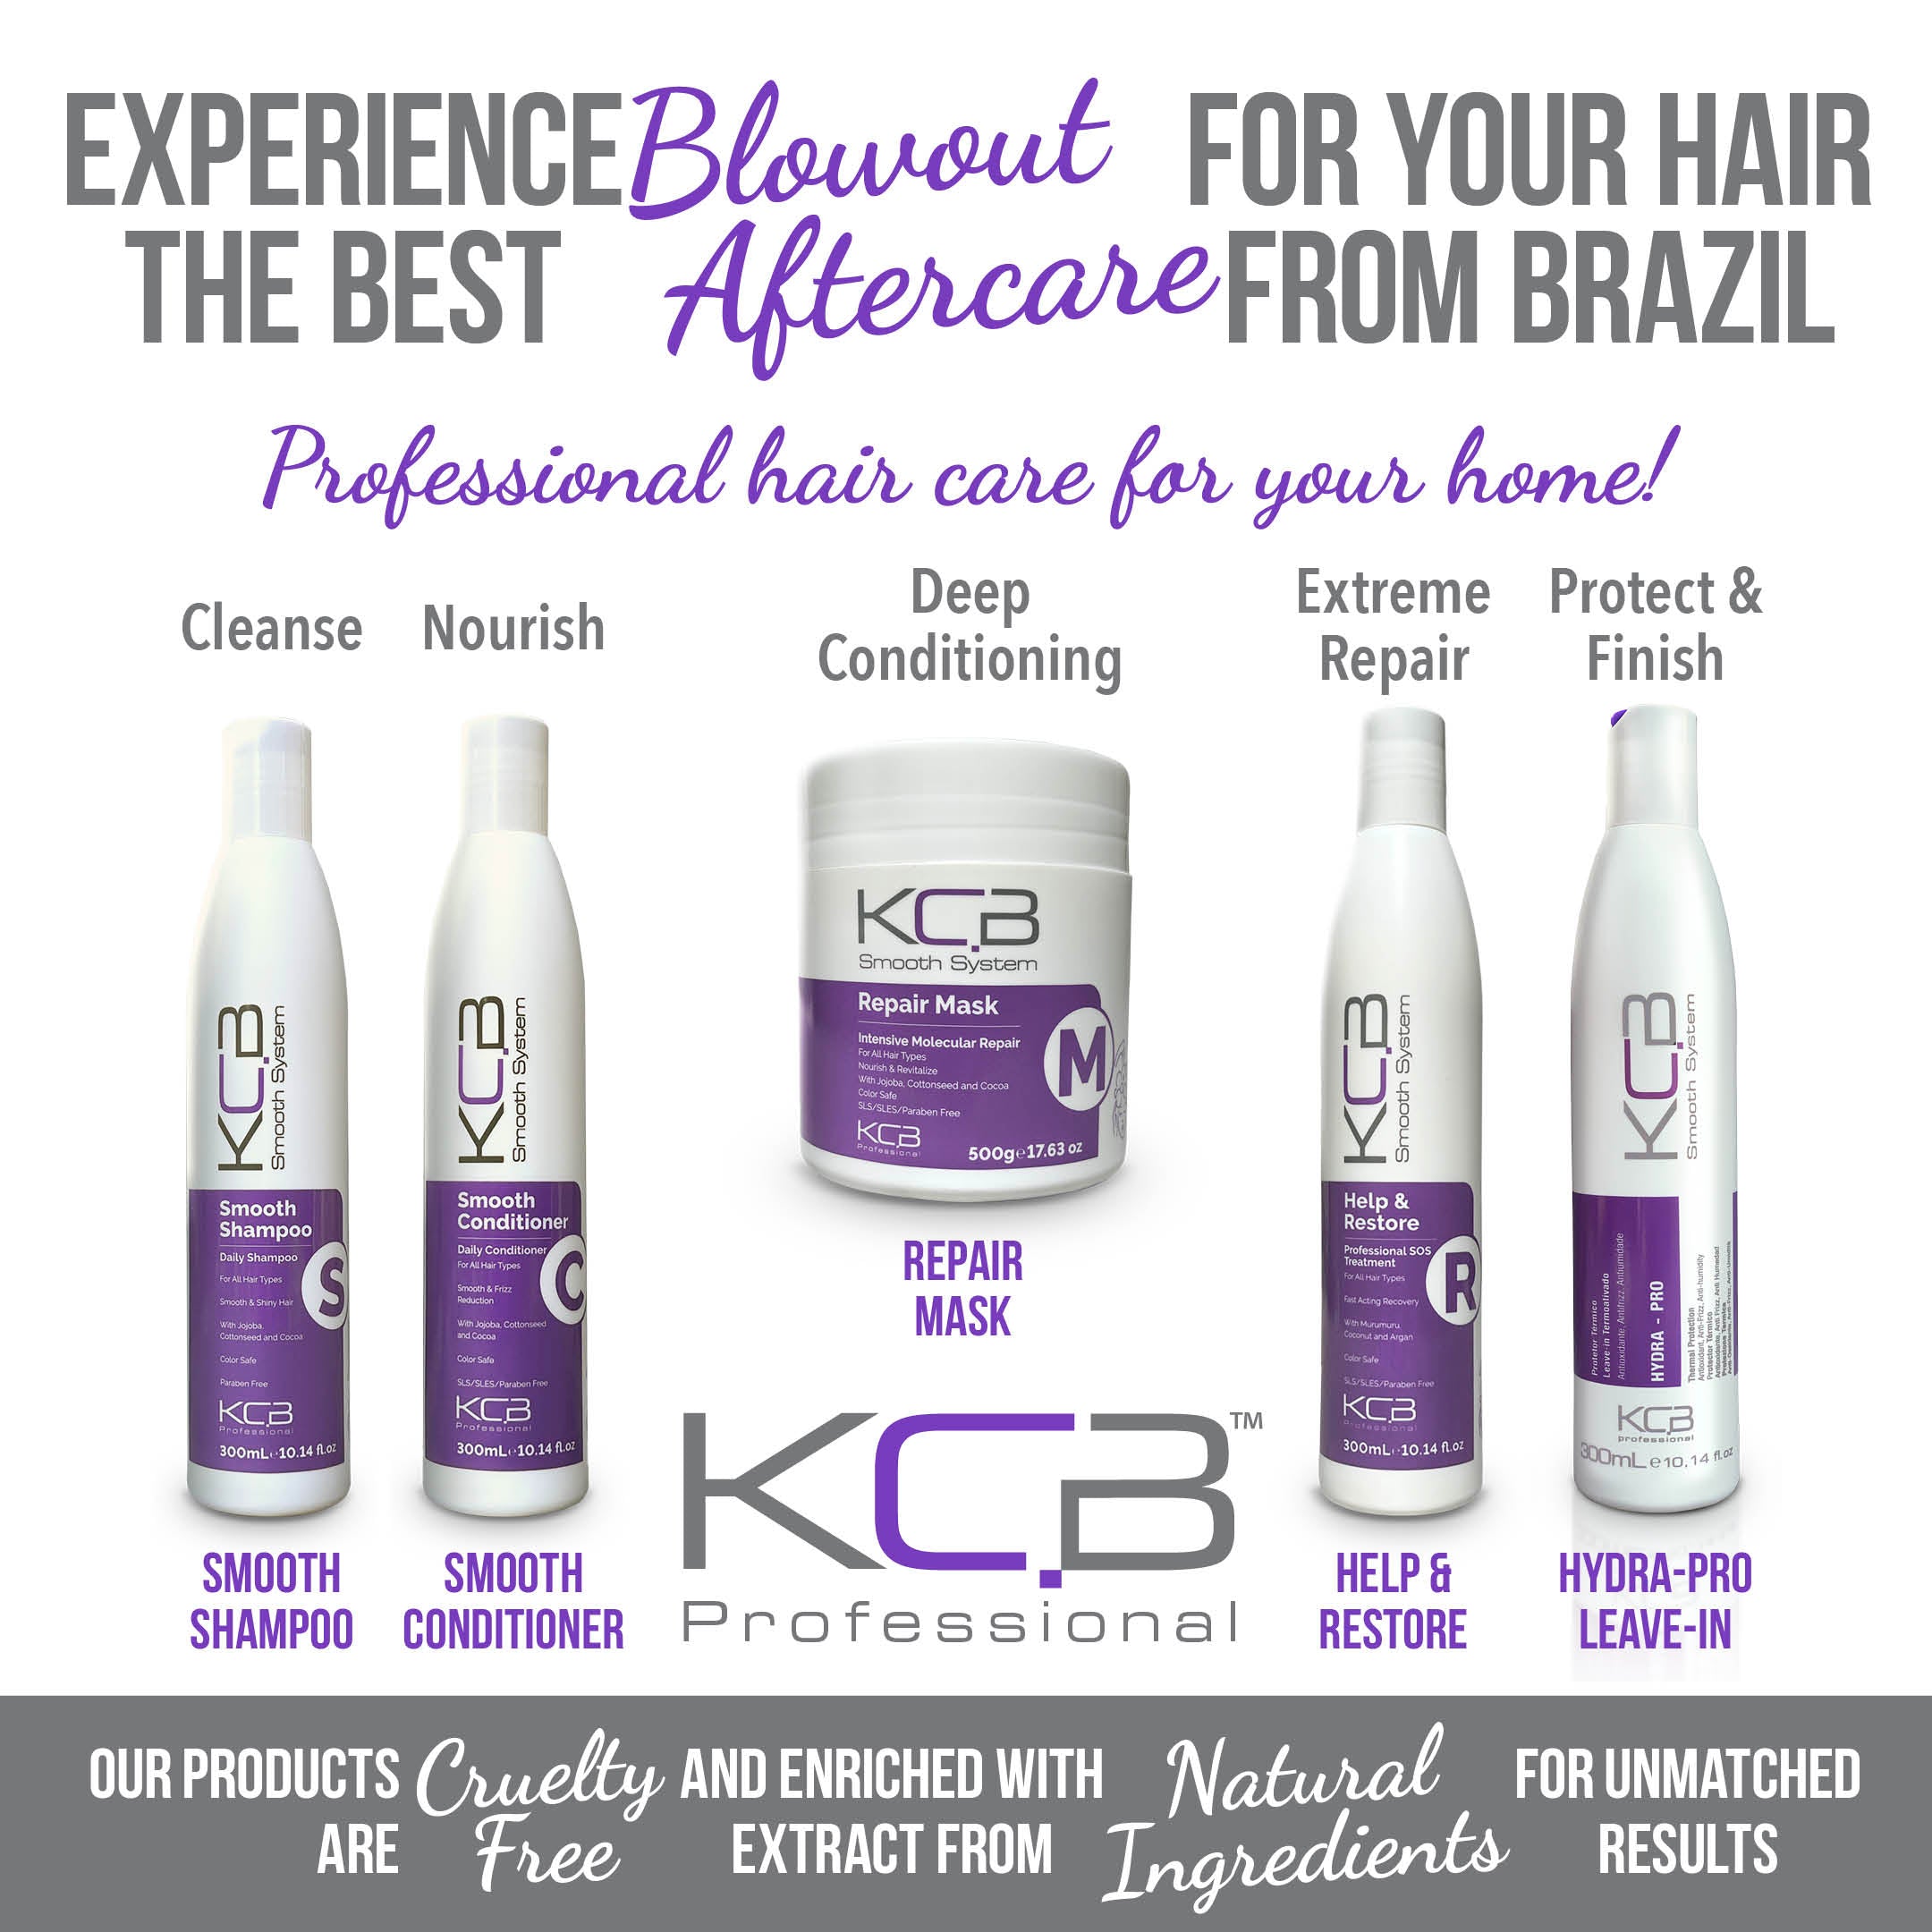 KCB Professional Smooth Shampoo for Smoothing and Hair Frizz Control. Cleansing, Softness, Manageability, All Hair Types, 10.14 Fl oz / 300ml. Enriched with Jojoba Oil, Cottonseed and Cocoa Butter.